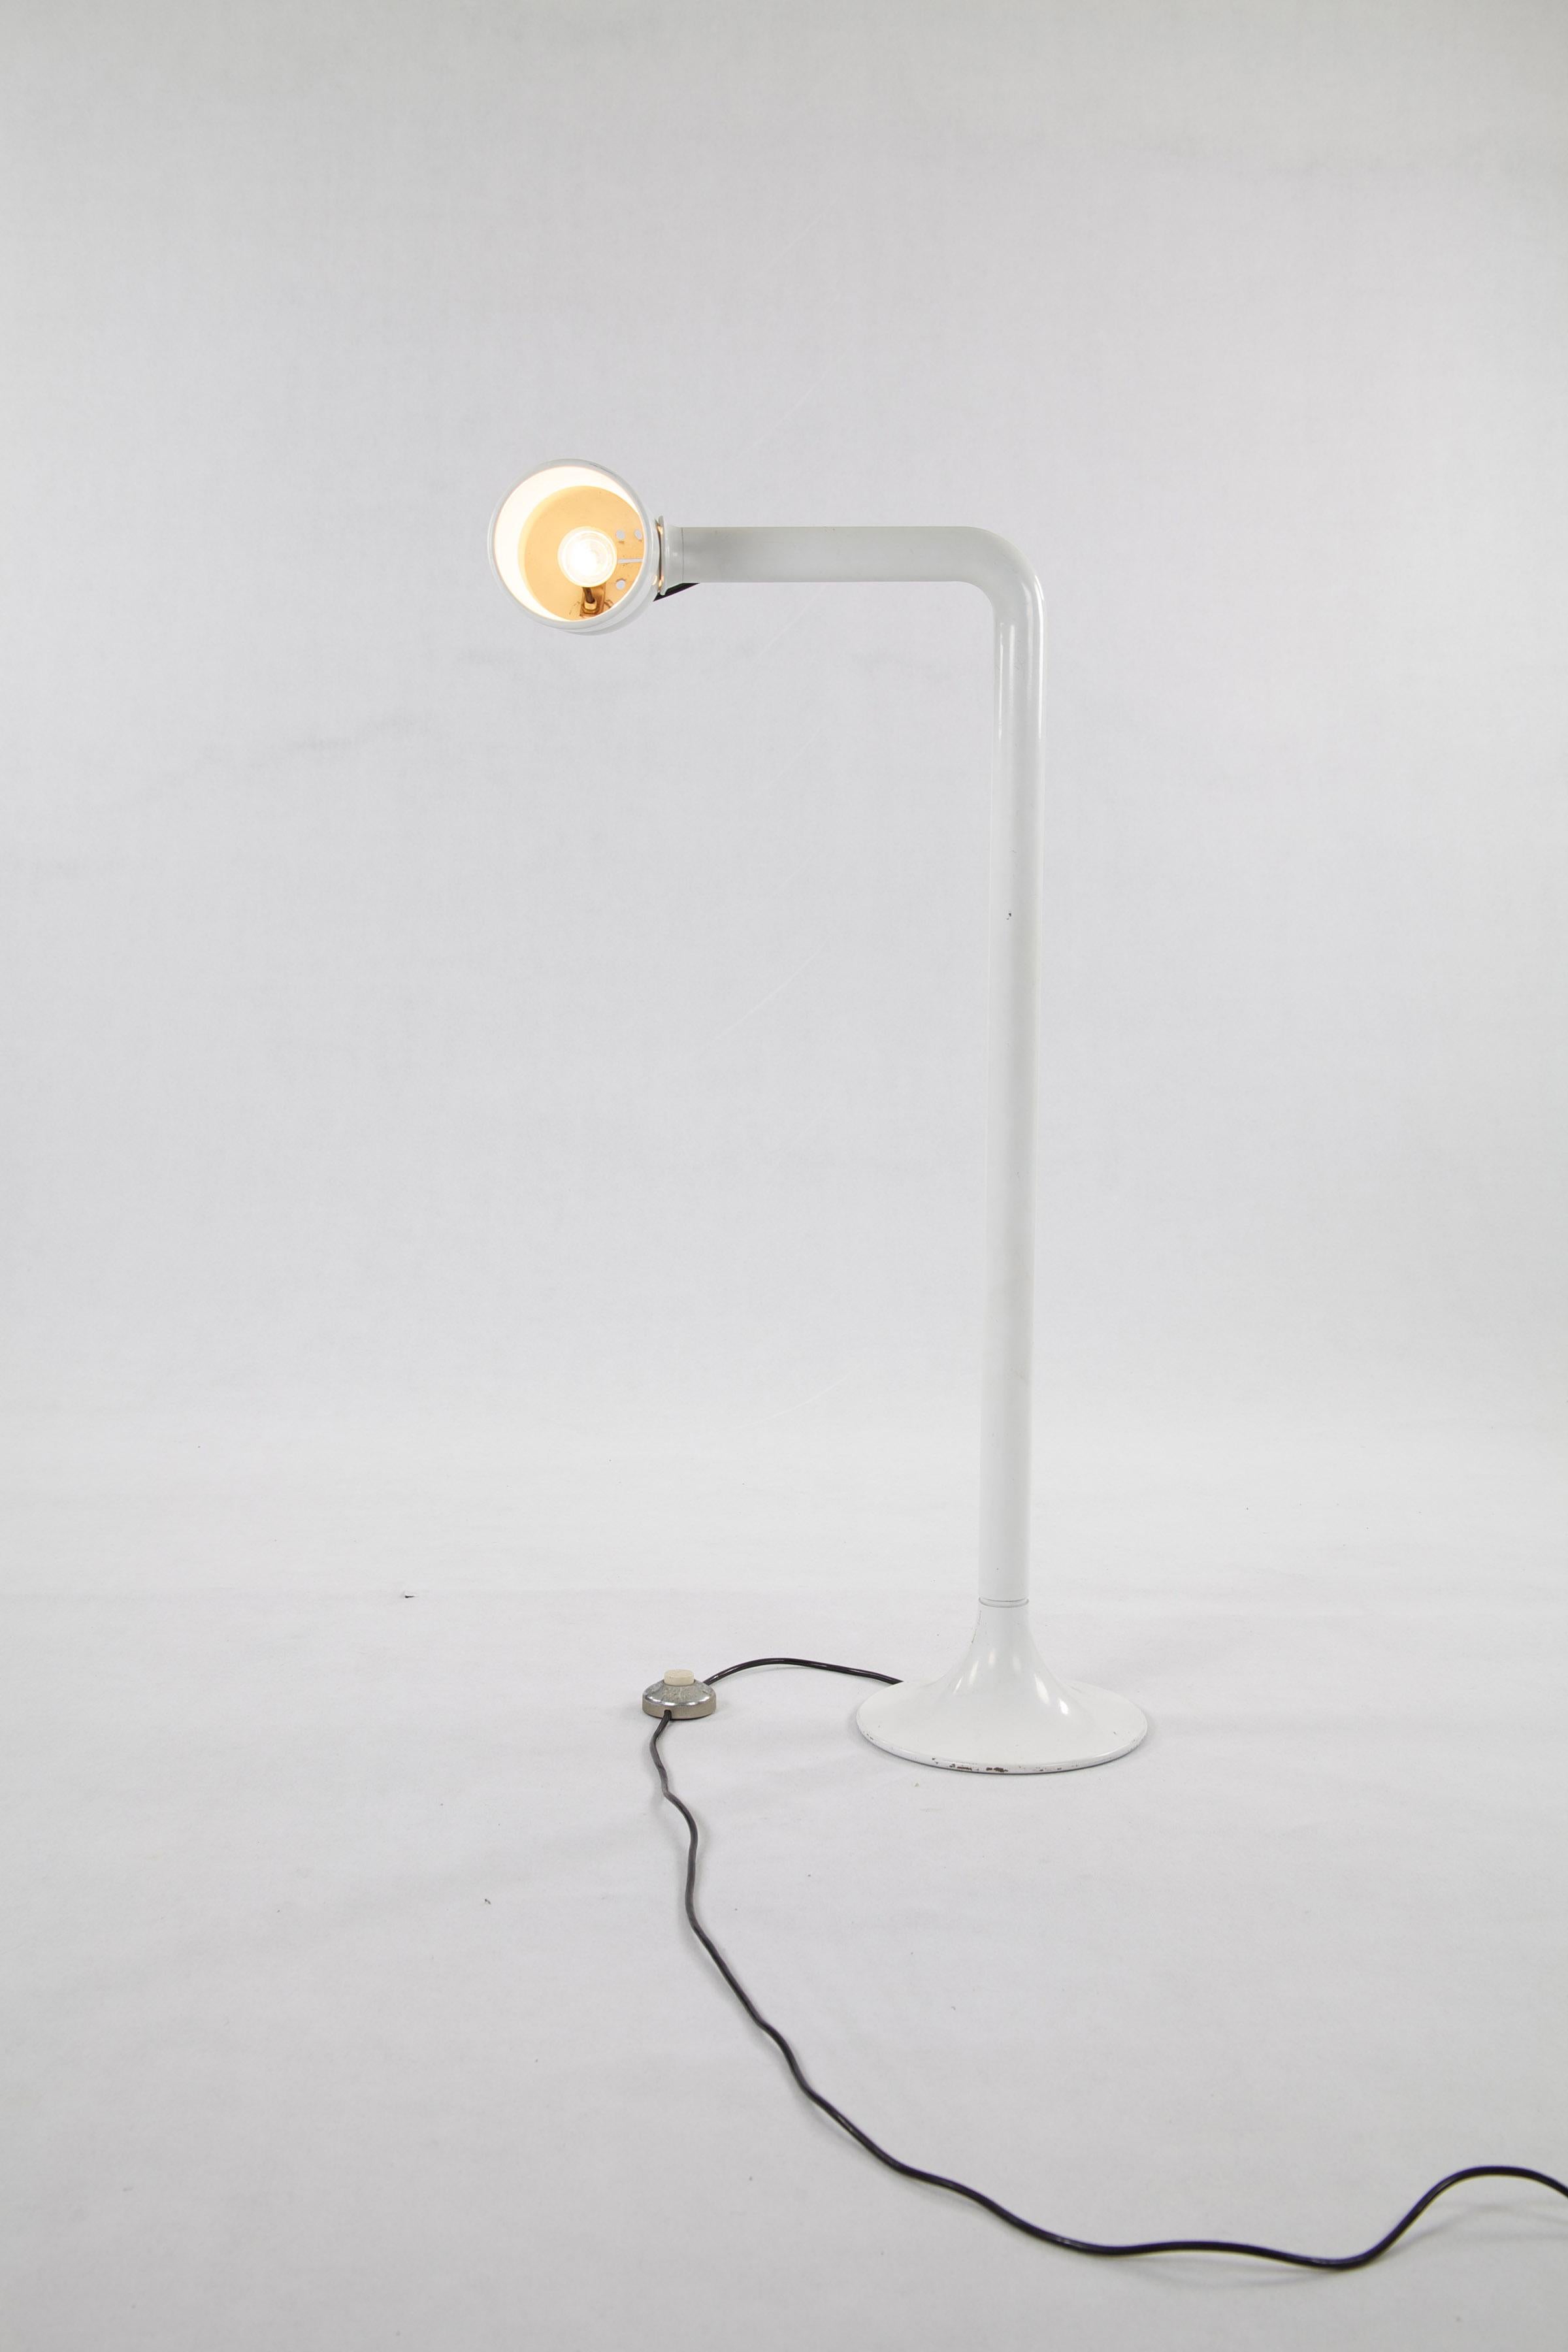 Floor lamp model 2135 - designed by Elio Martinelli, manufactured by Martinelli Luce, Italy, 1966. The lamps body is made of white lacquered metal with a swivel arm and articulated projector.
 